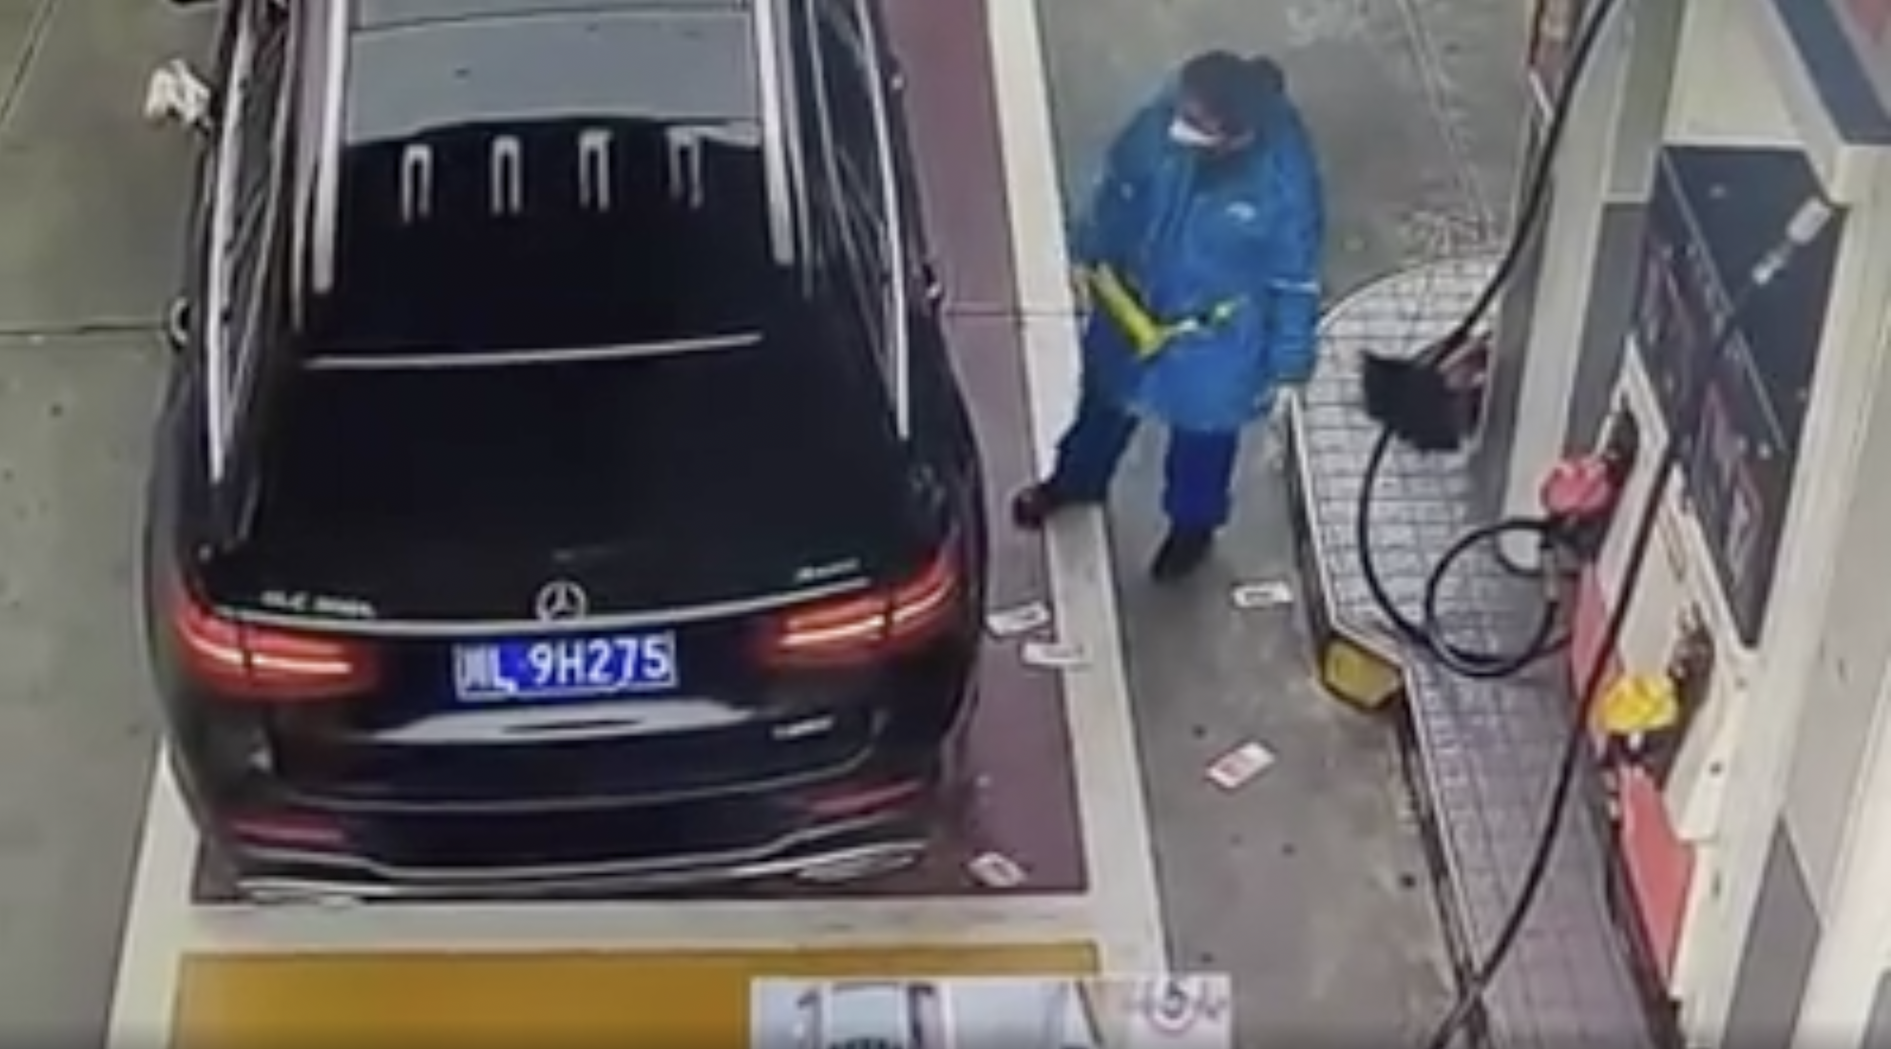 People in Mercedes throw money on the ground for gas attendant to pick up.